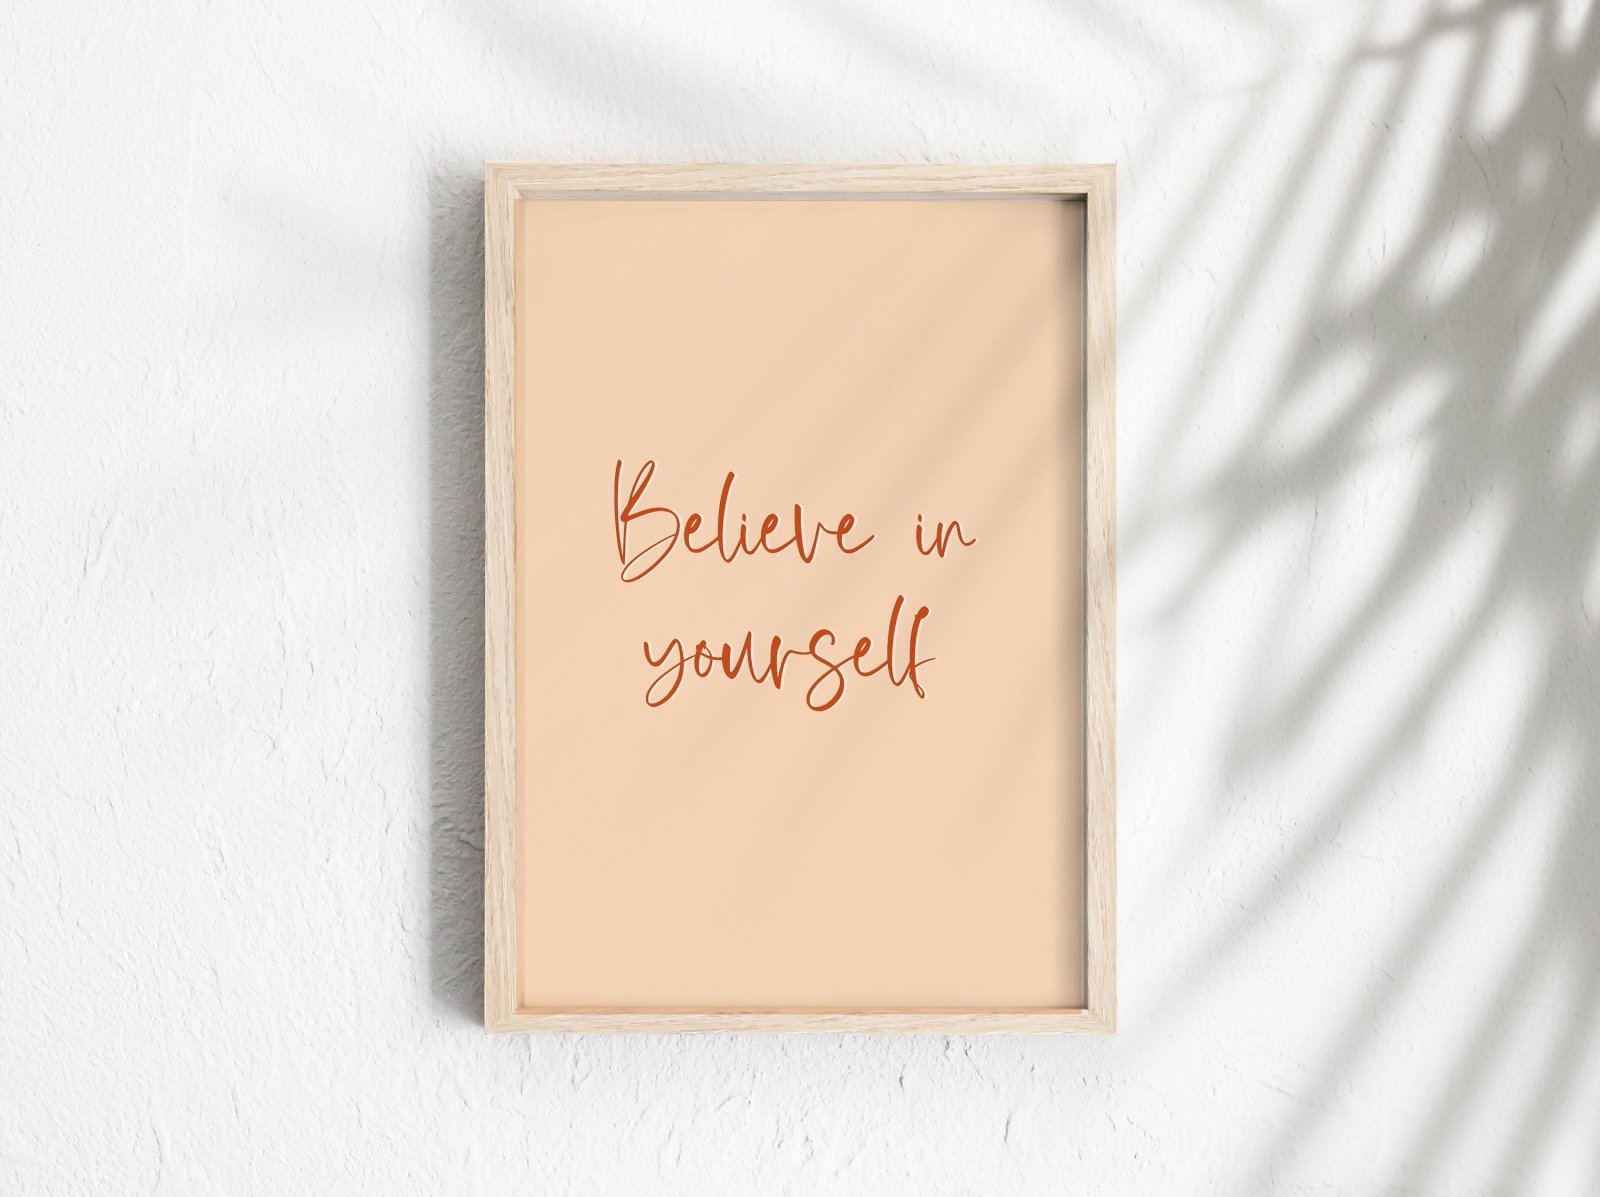 Poster Believe in yourself, Poster Selbstbewusstsein, Poster Sprüche, Poster Achtsamkeit, Yoga Poster, Affirmationsposter, Din A4 - HappyLuz Shop